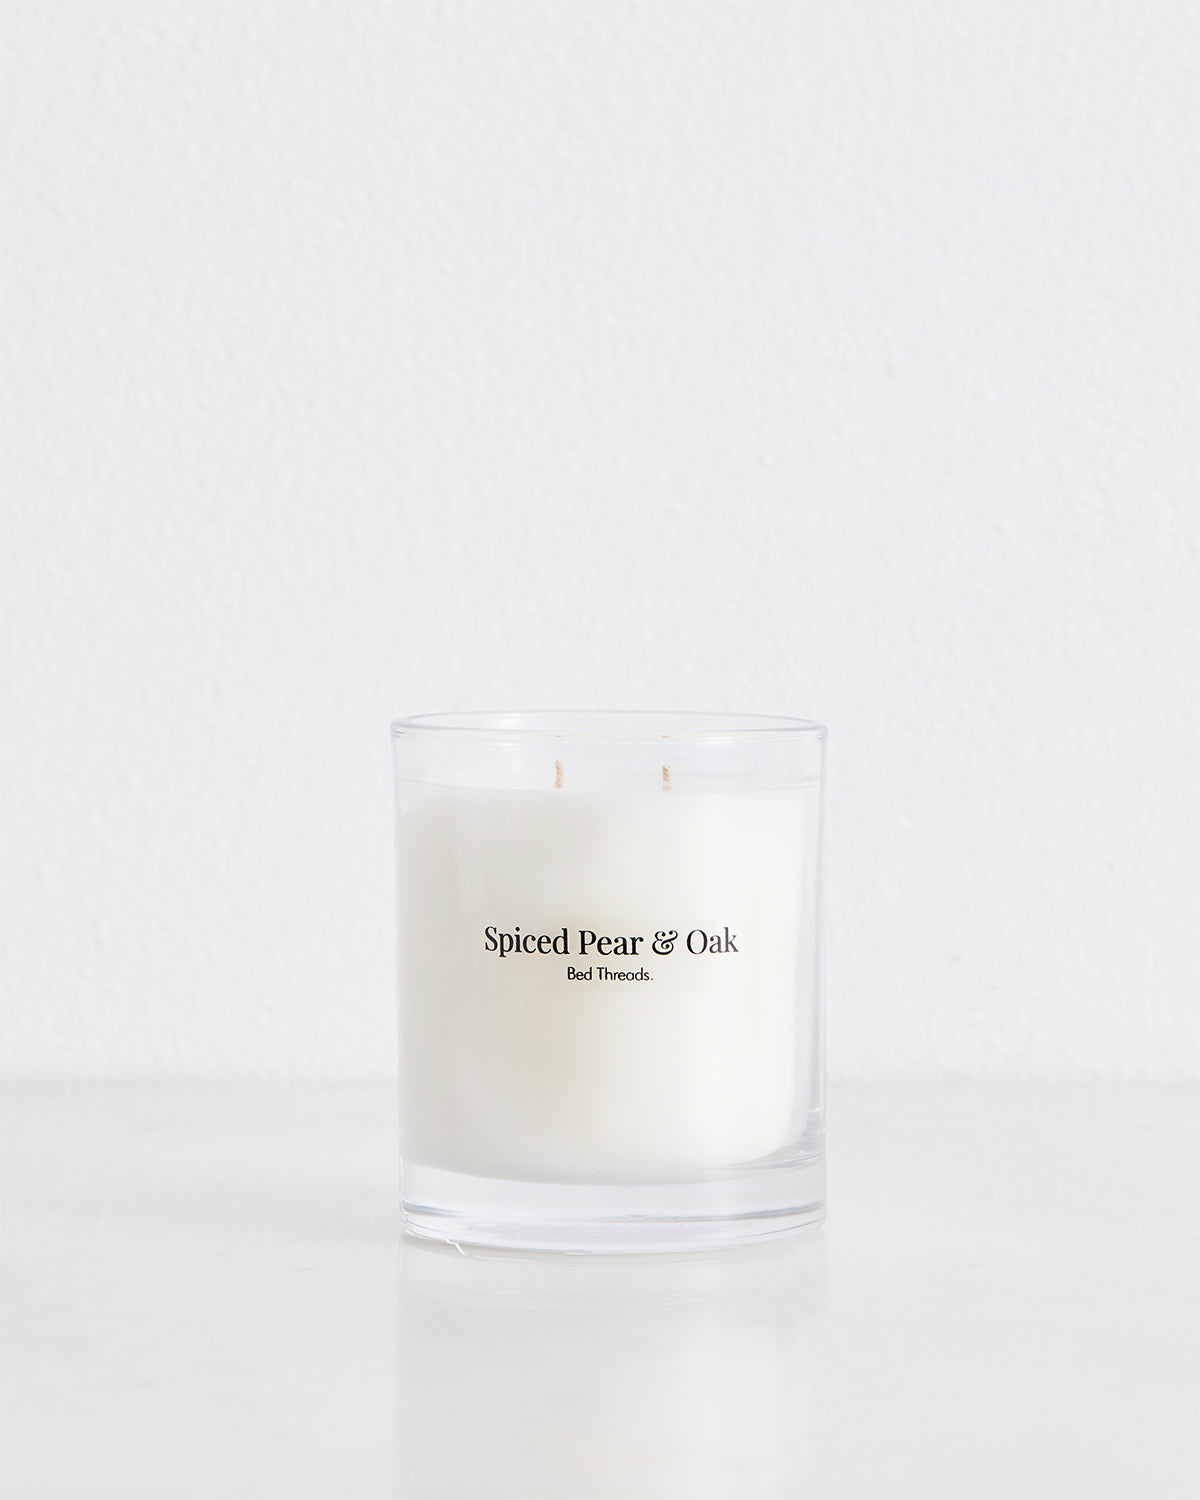 Spiced Pear & Oak Candle by Bed Threads